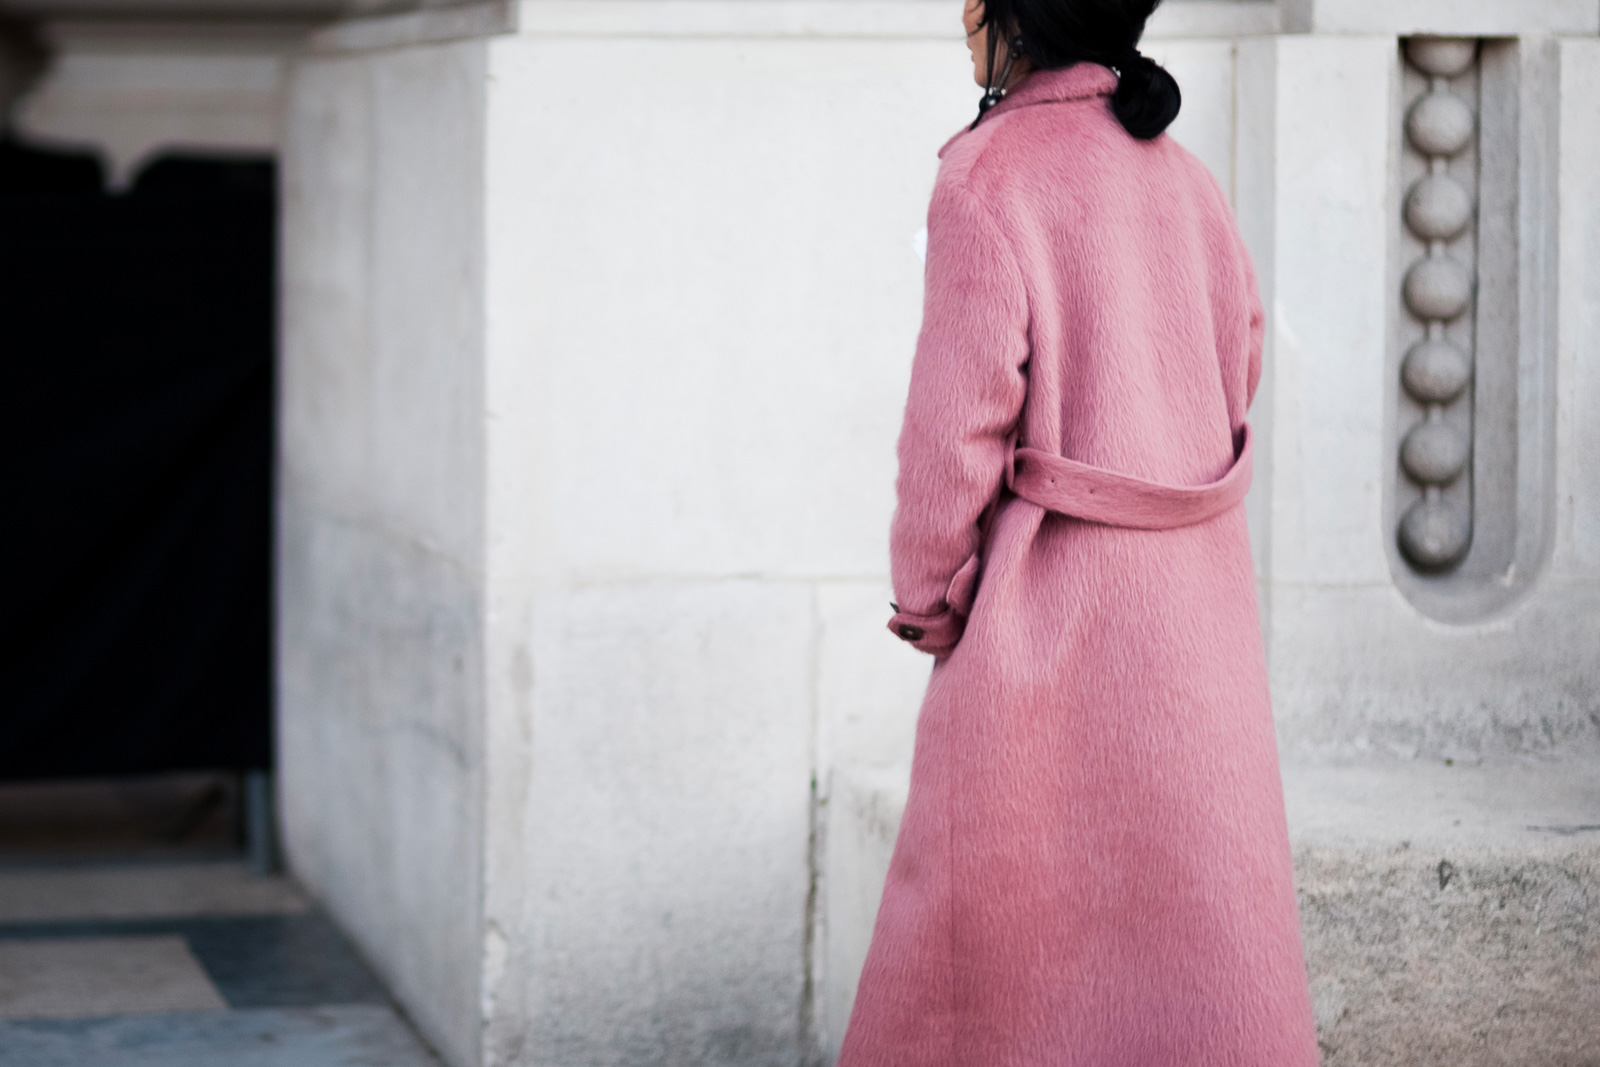 Woman wearing a pink coat before the Maison Margiela Fall/Winter 2015-2016 fashion show in Paris, France